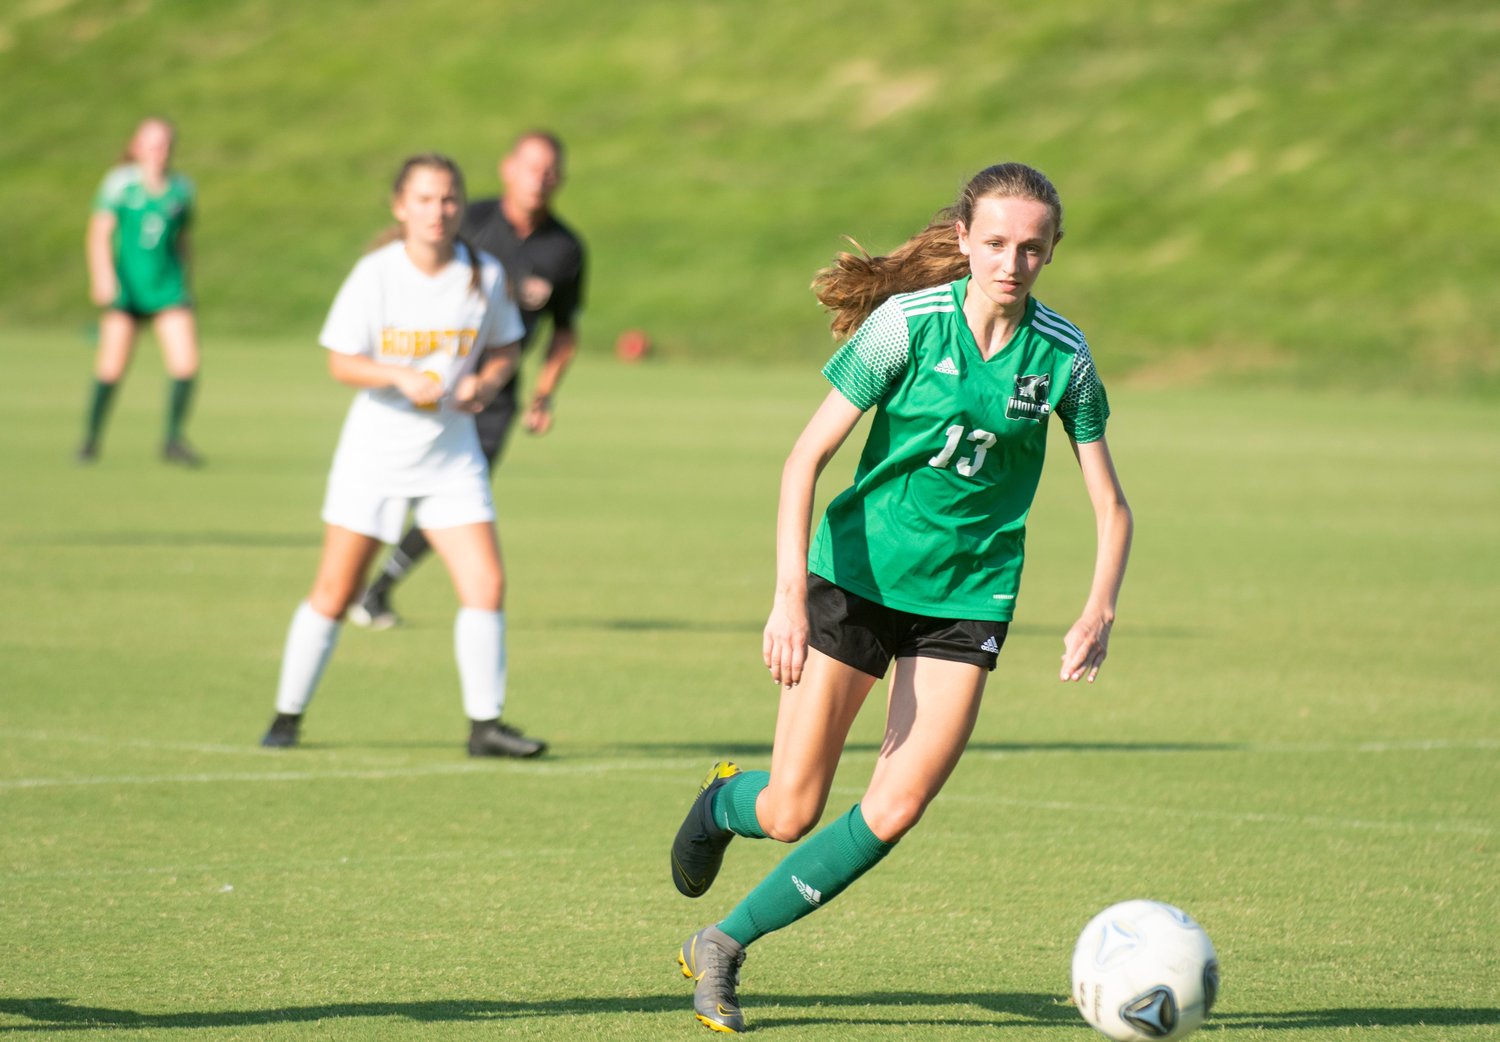 Woods Charter sophomore Caroline Mitchell (13) dribbles the ball downfield in the Wolves' 5-0 win over the Hobbton Wildcats last Tuesday in Cary.